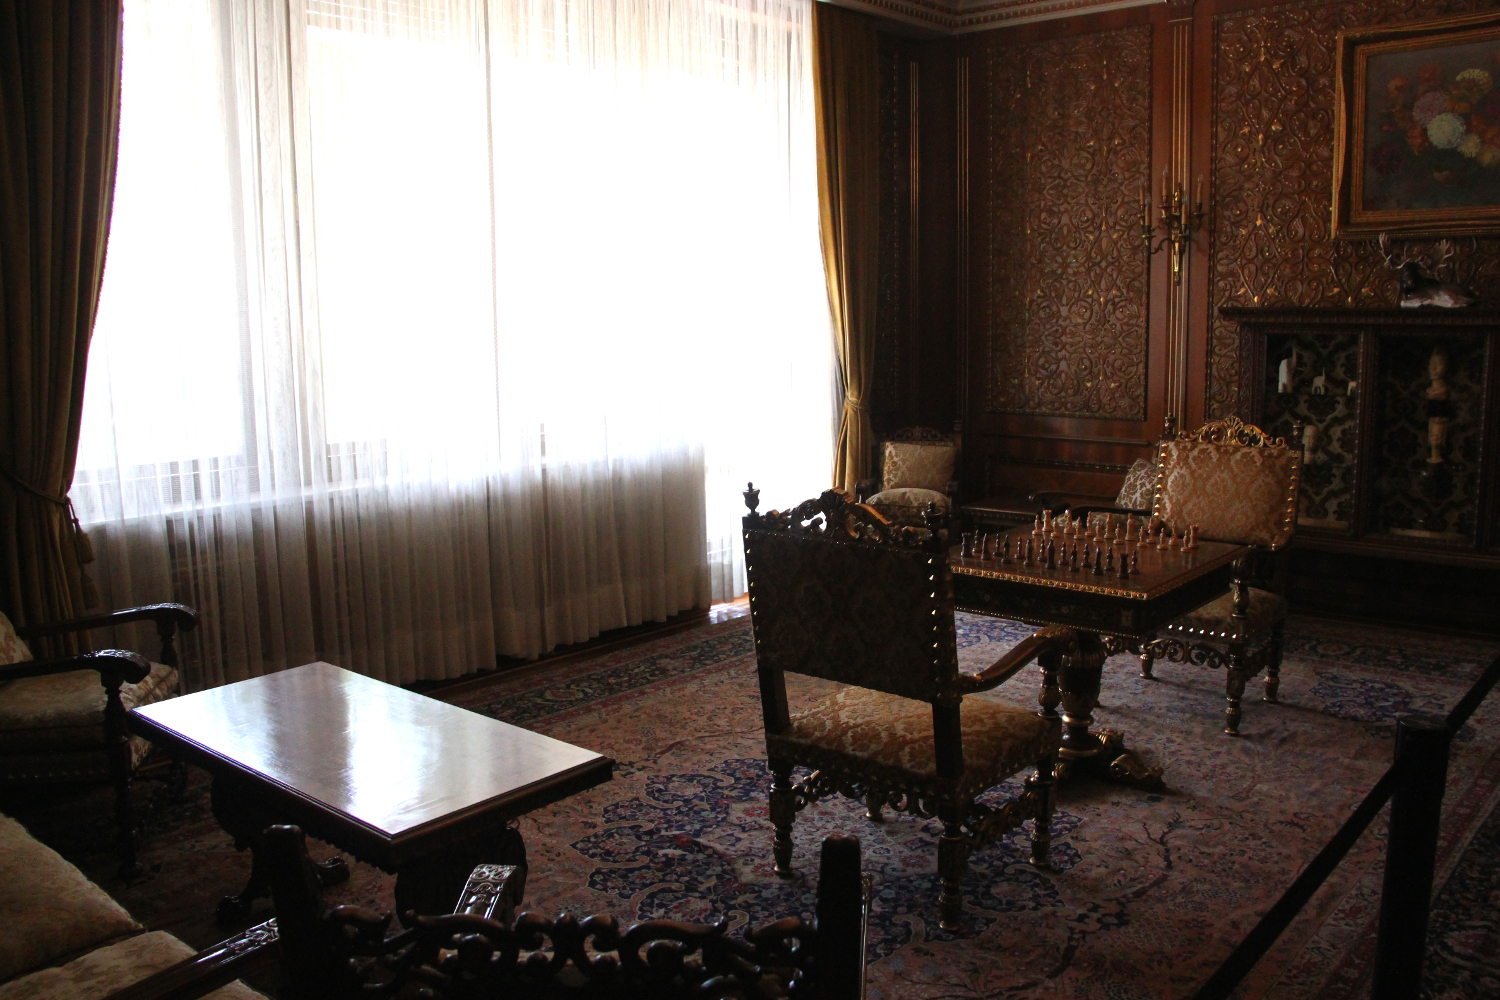 Primaverii (Spring) Palace, Ceausescu’s private residence - Nicolae Ceausescu's apartment - day room